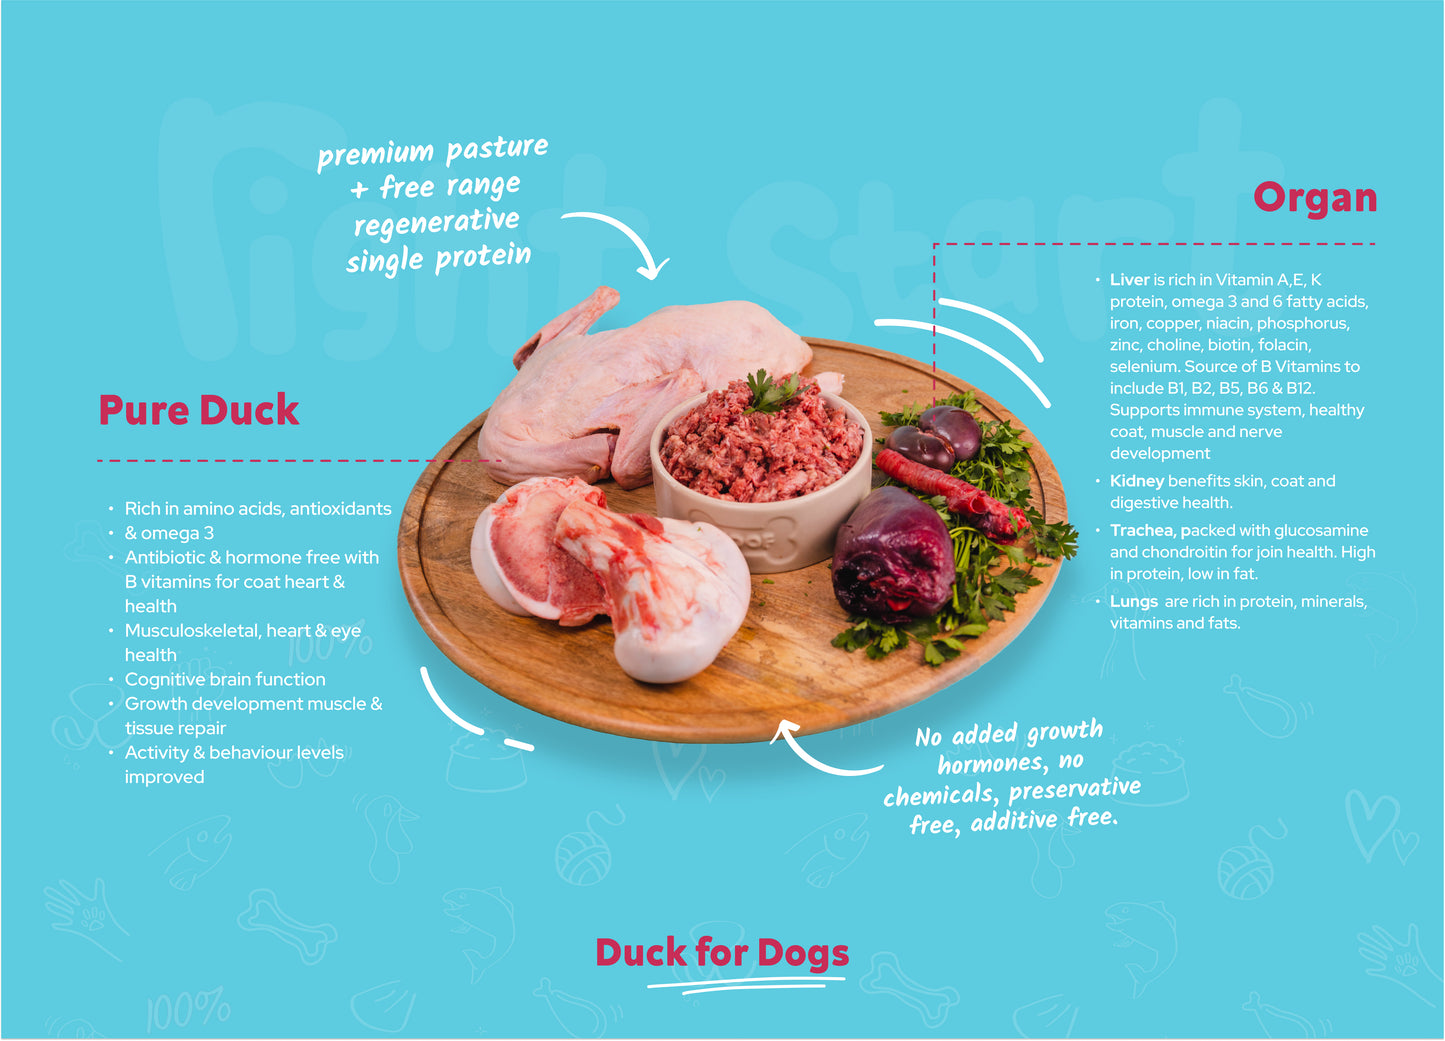 duck box for dogs nutrition information